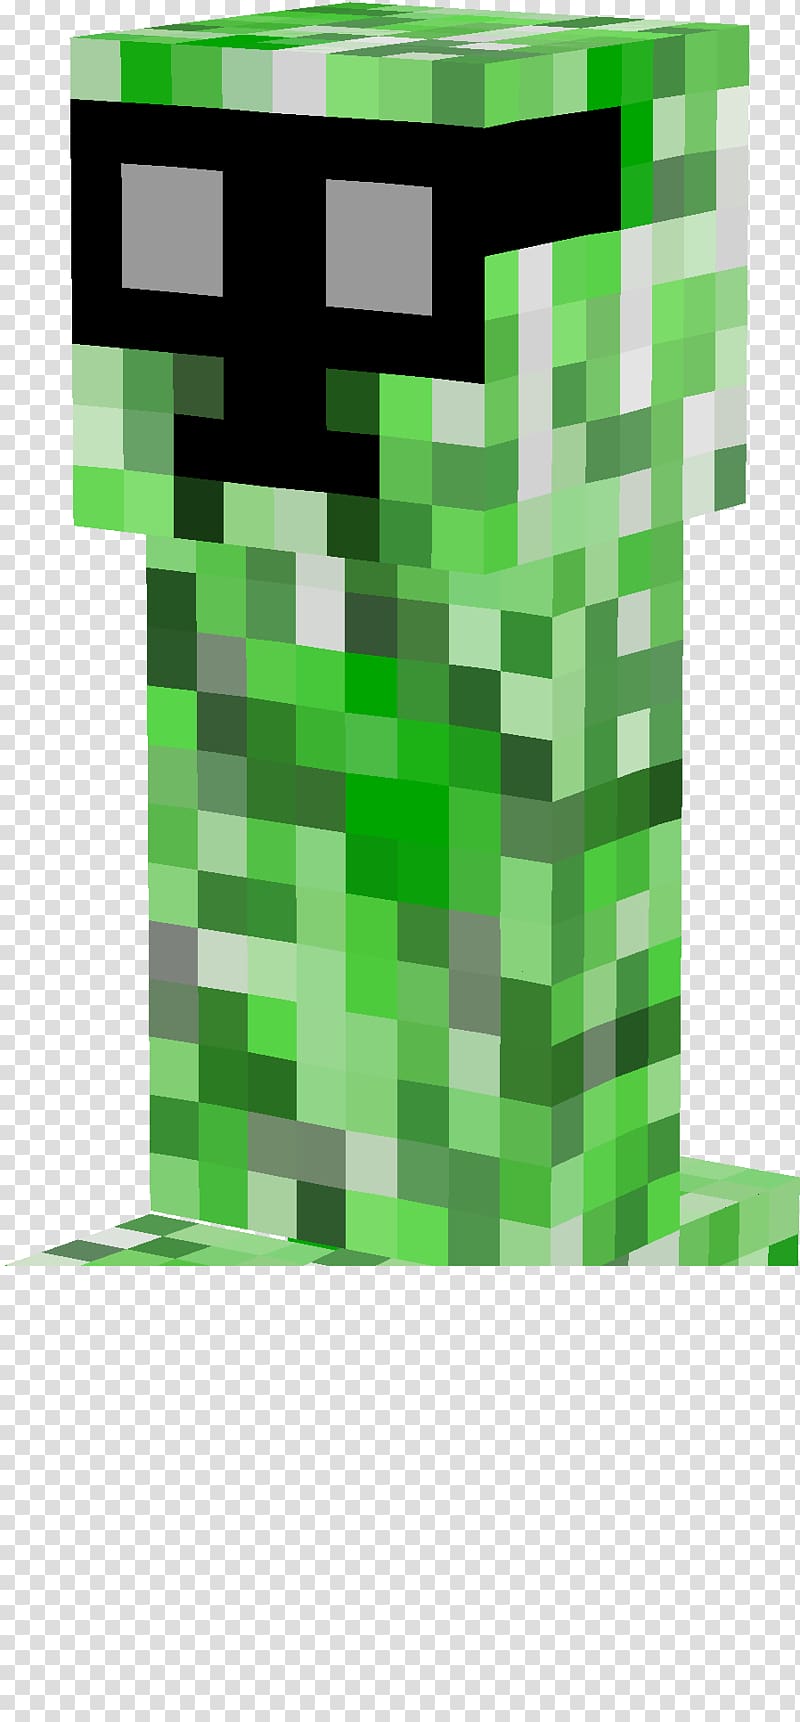 Minecraft Pocket Edition Minecraft Story Mode Mob Creeper Skin Transparent Background Png Clipart Hiclipart - minecraft pocket edition roblox creeper clip art picture